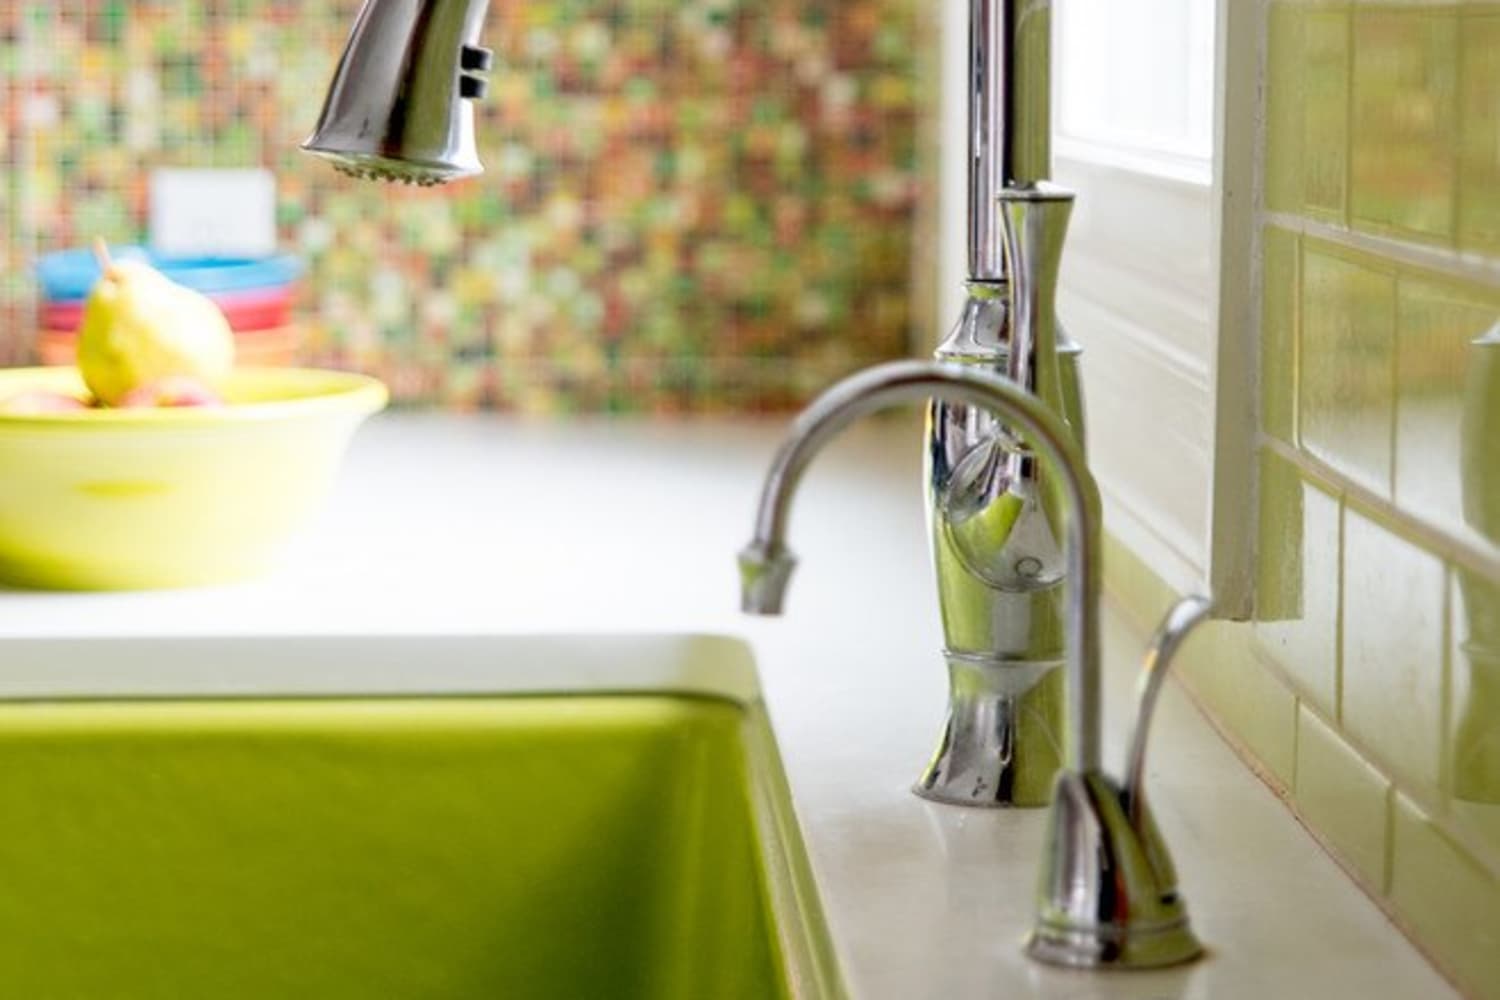 Should You Replace Your Rental Kitchen Sink Faucet?